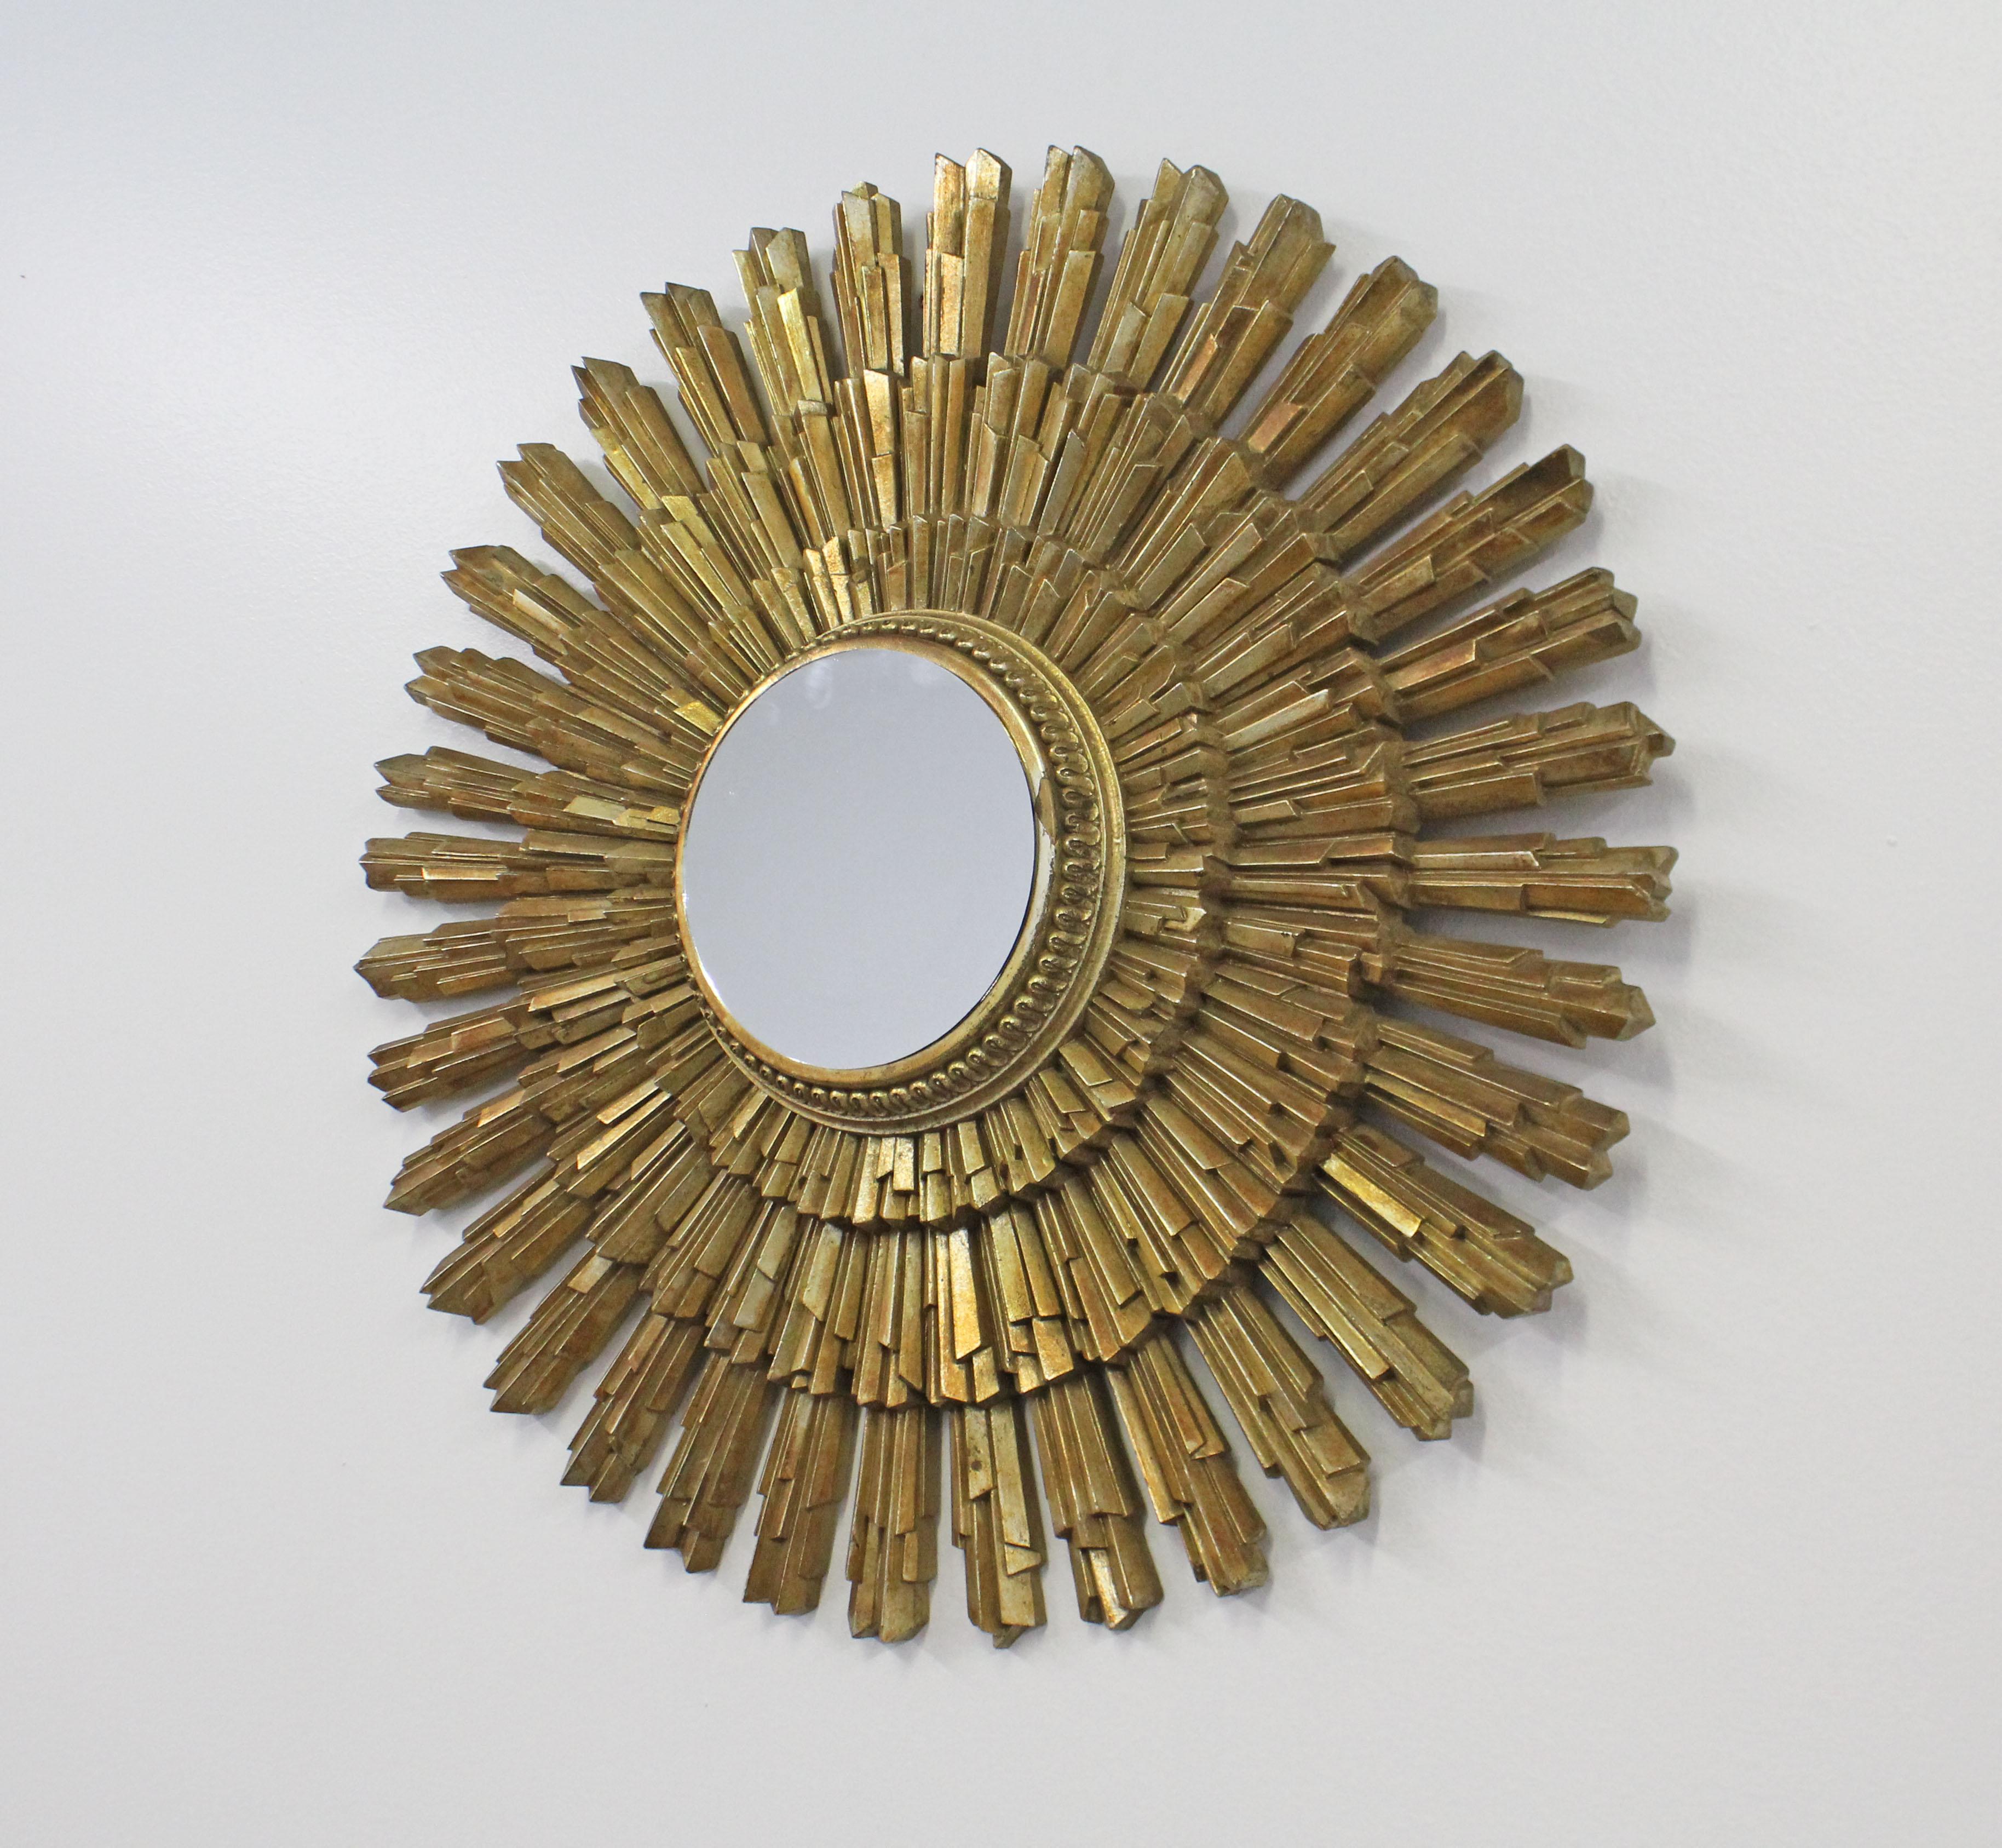 Offered is a super unique, vintage midcentury wall mirror in the shape of a starburst. Features a gold gilded enamel frame and center mirror. It is in good condition with minor flaws and wear around the frame (see photos). It has a small loop for